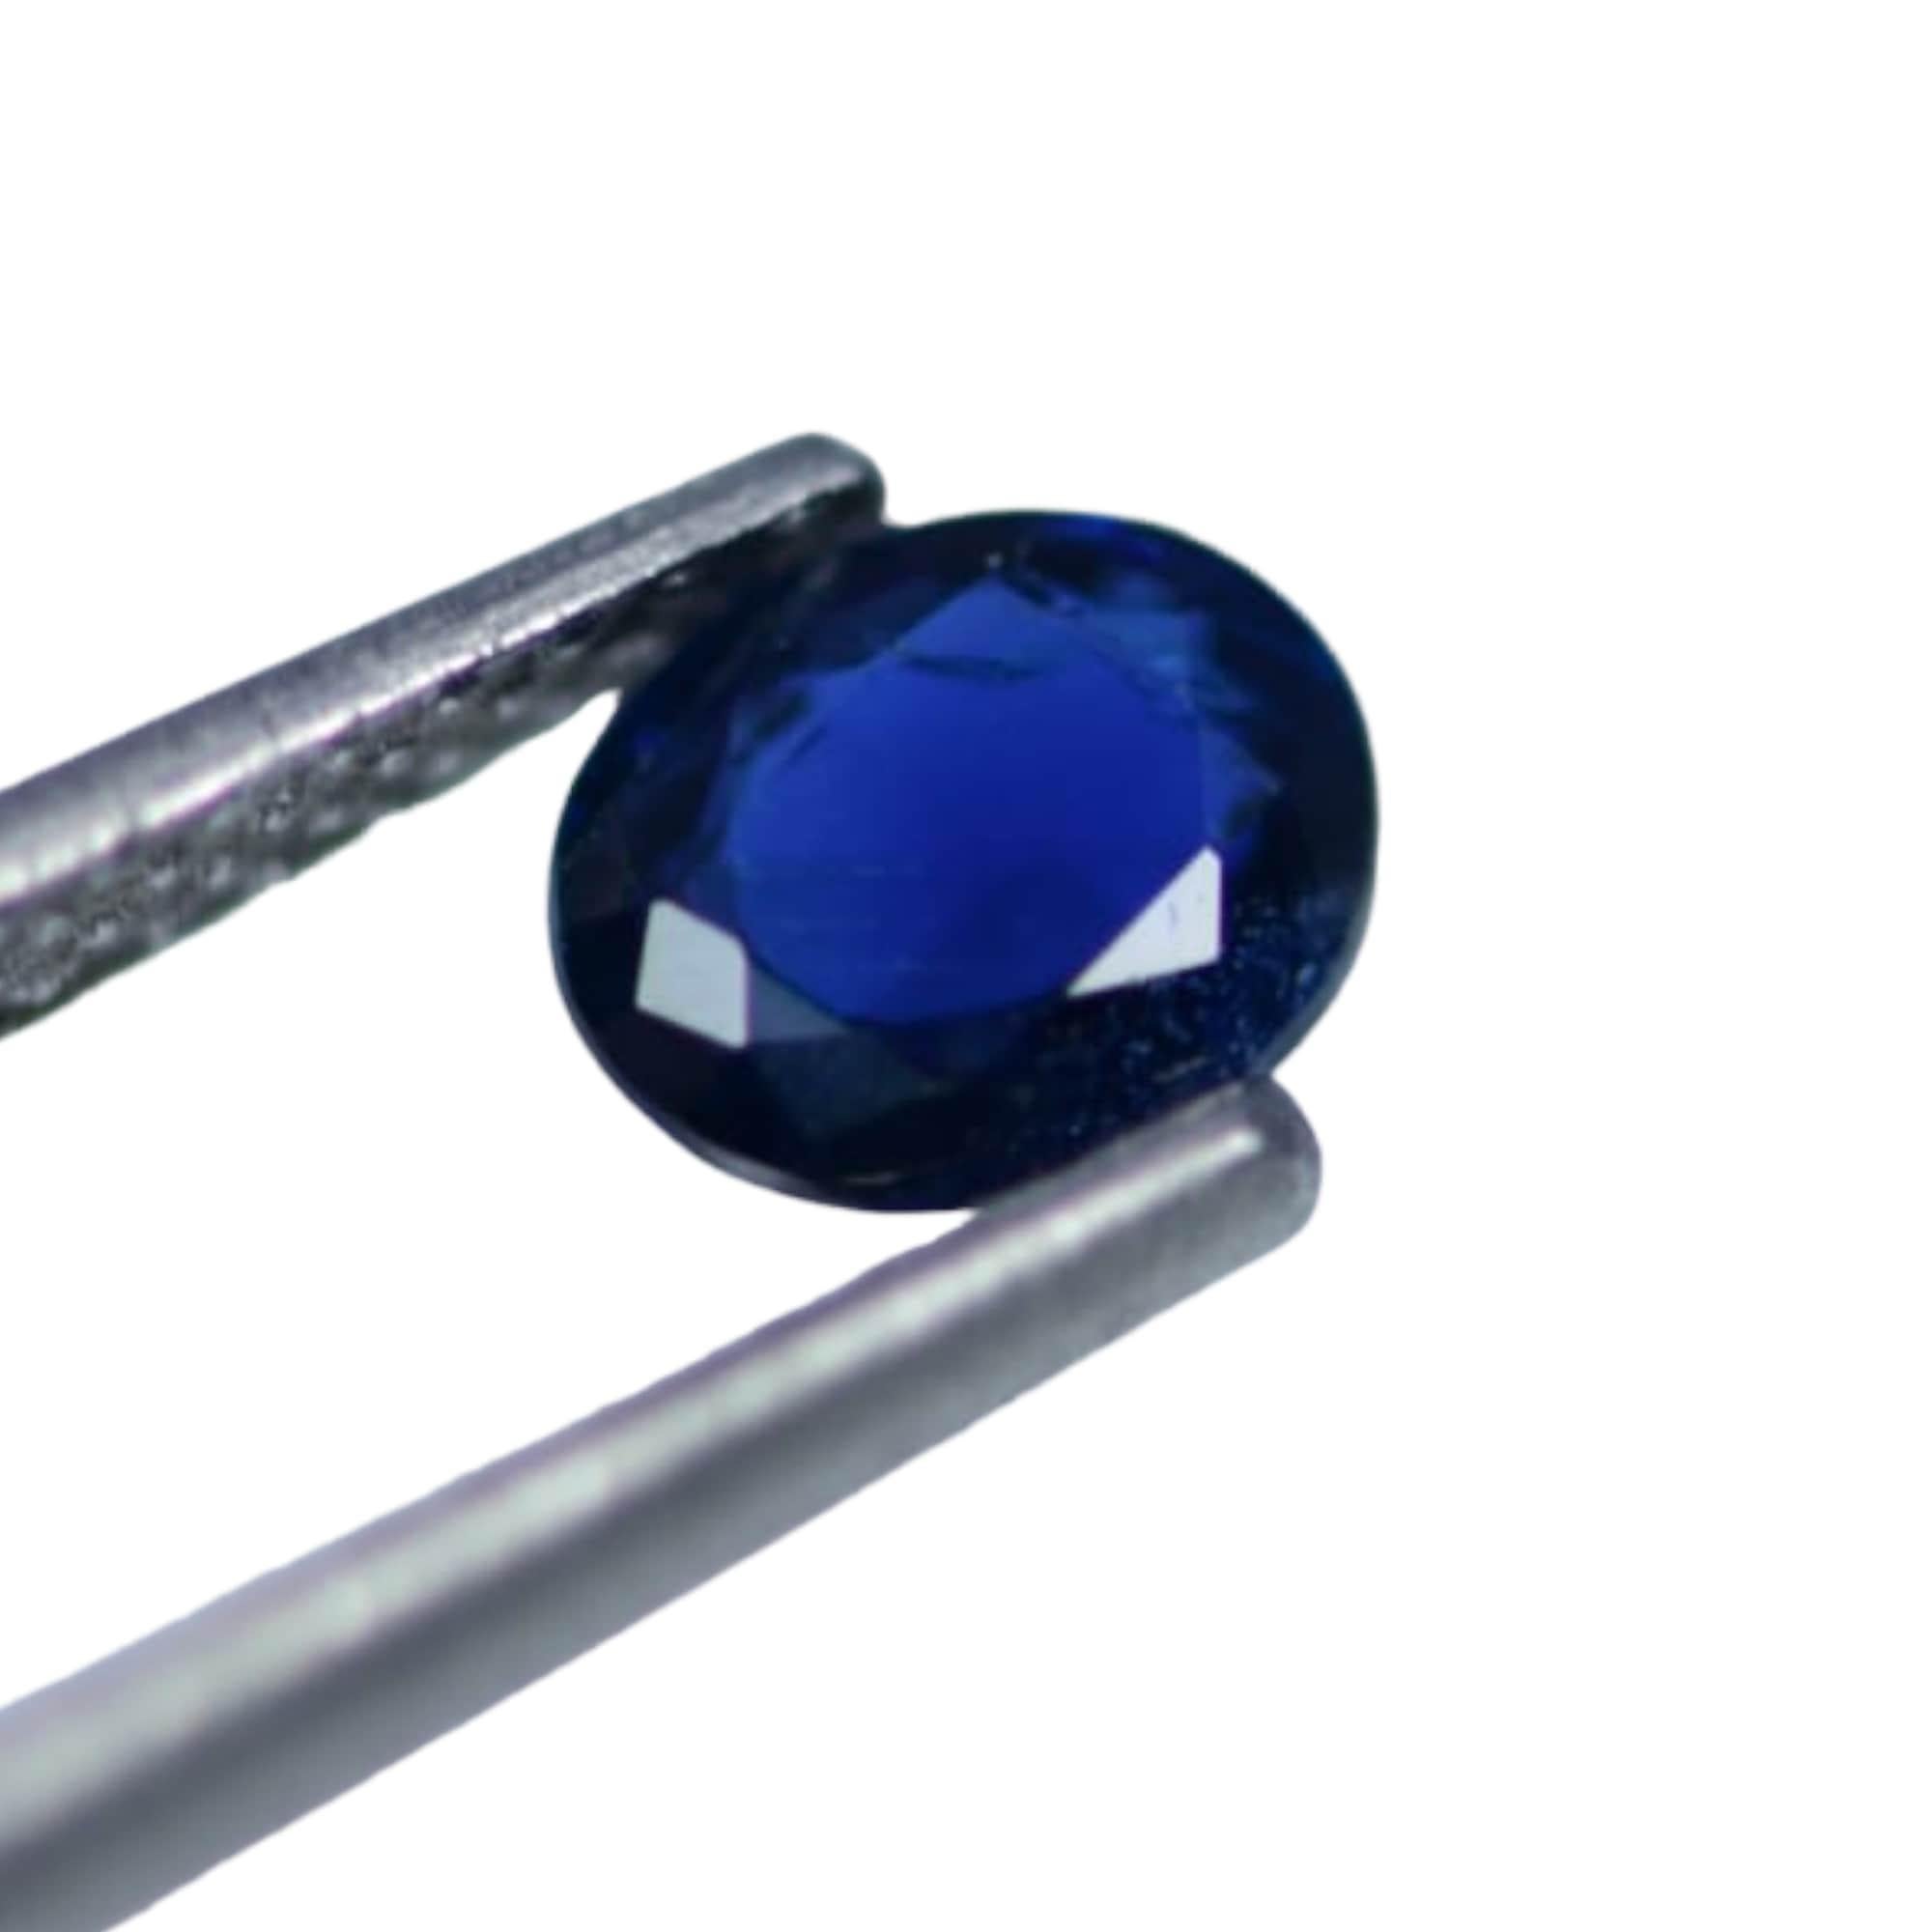 Species : Natural Corundum
Variety : Natural Sapphire
Shape and Cut : Oval Mixed Cut
Weight : 0.55 Carat
Measurements : 5.24 x 4.26 x 2.55 mm
Color : Deep Blue
Transparency : Transparent
Certificate number : 310834308
This gemstone is certified from